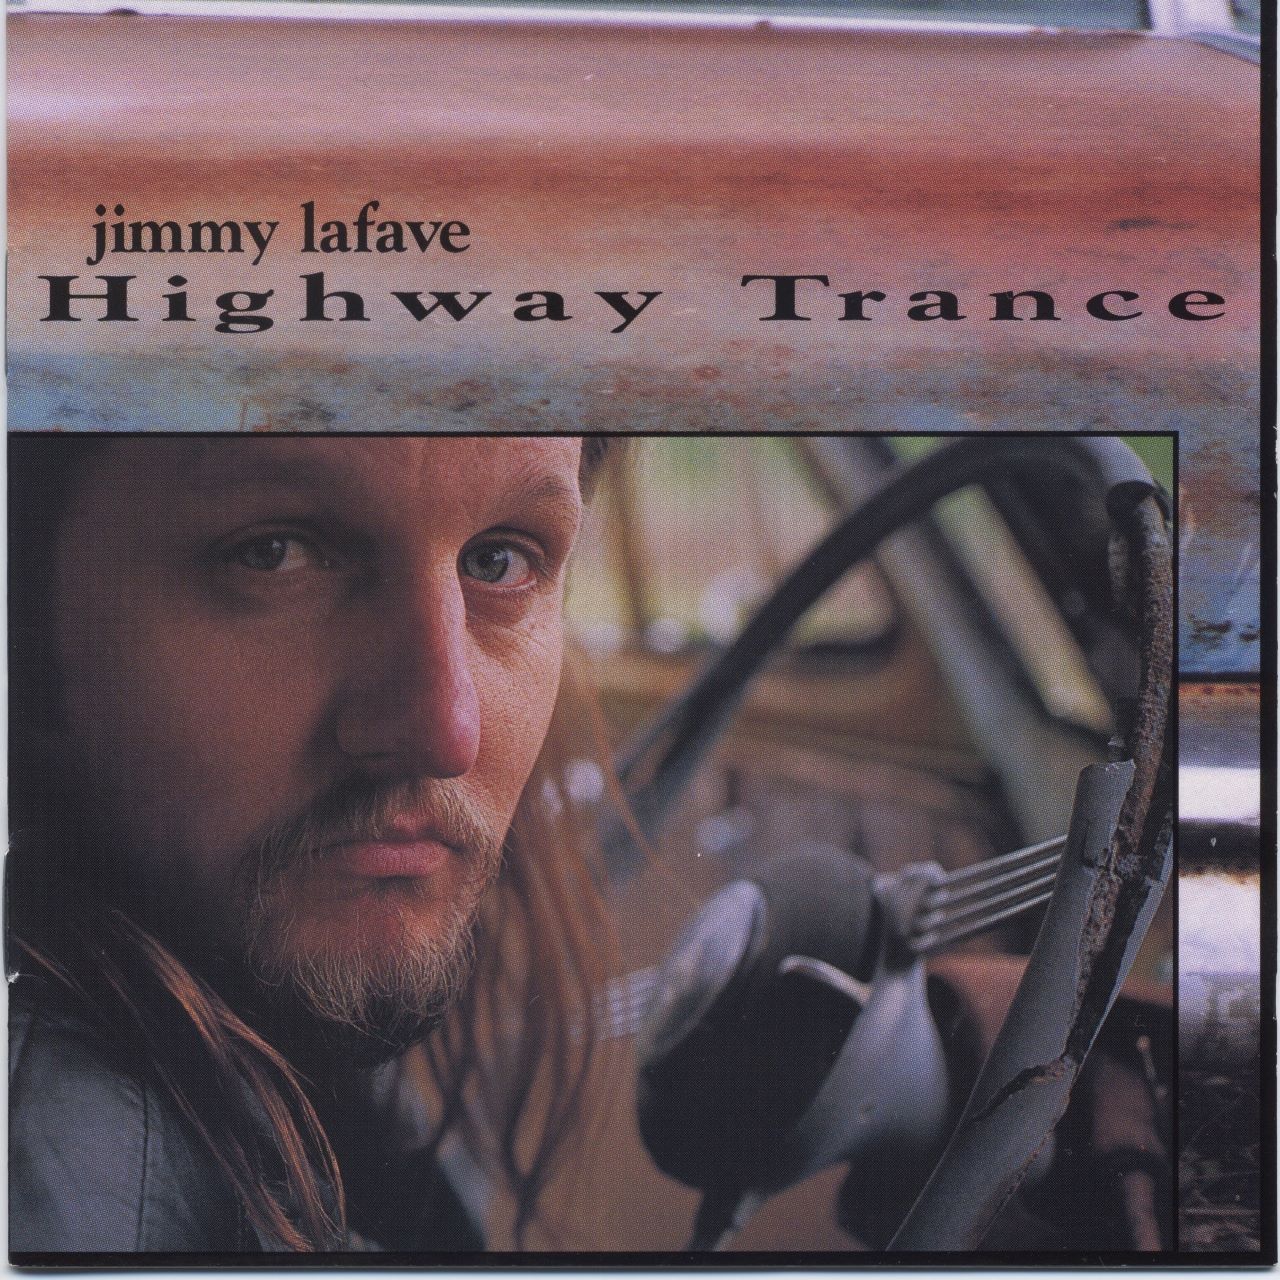 Jimmy LaFave - Highway Trance cover album